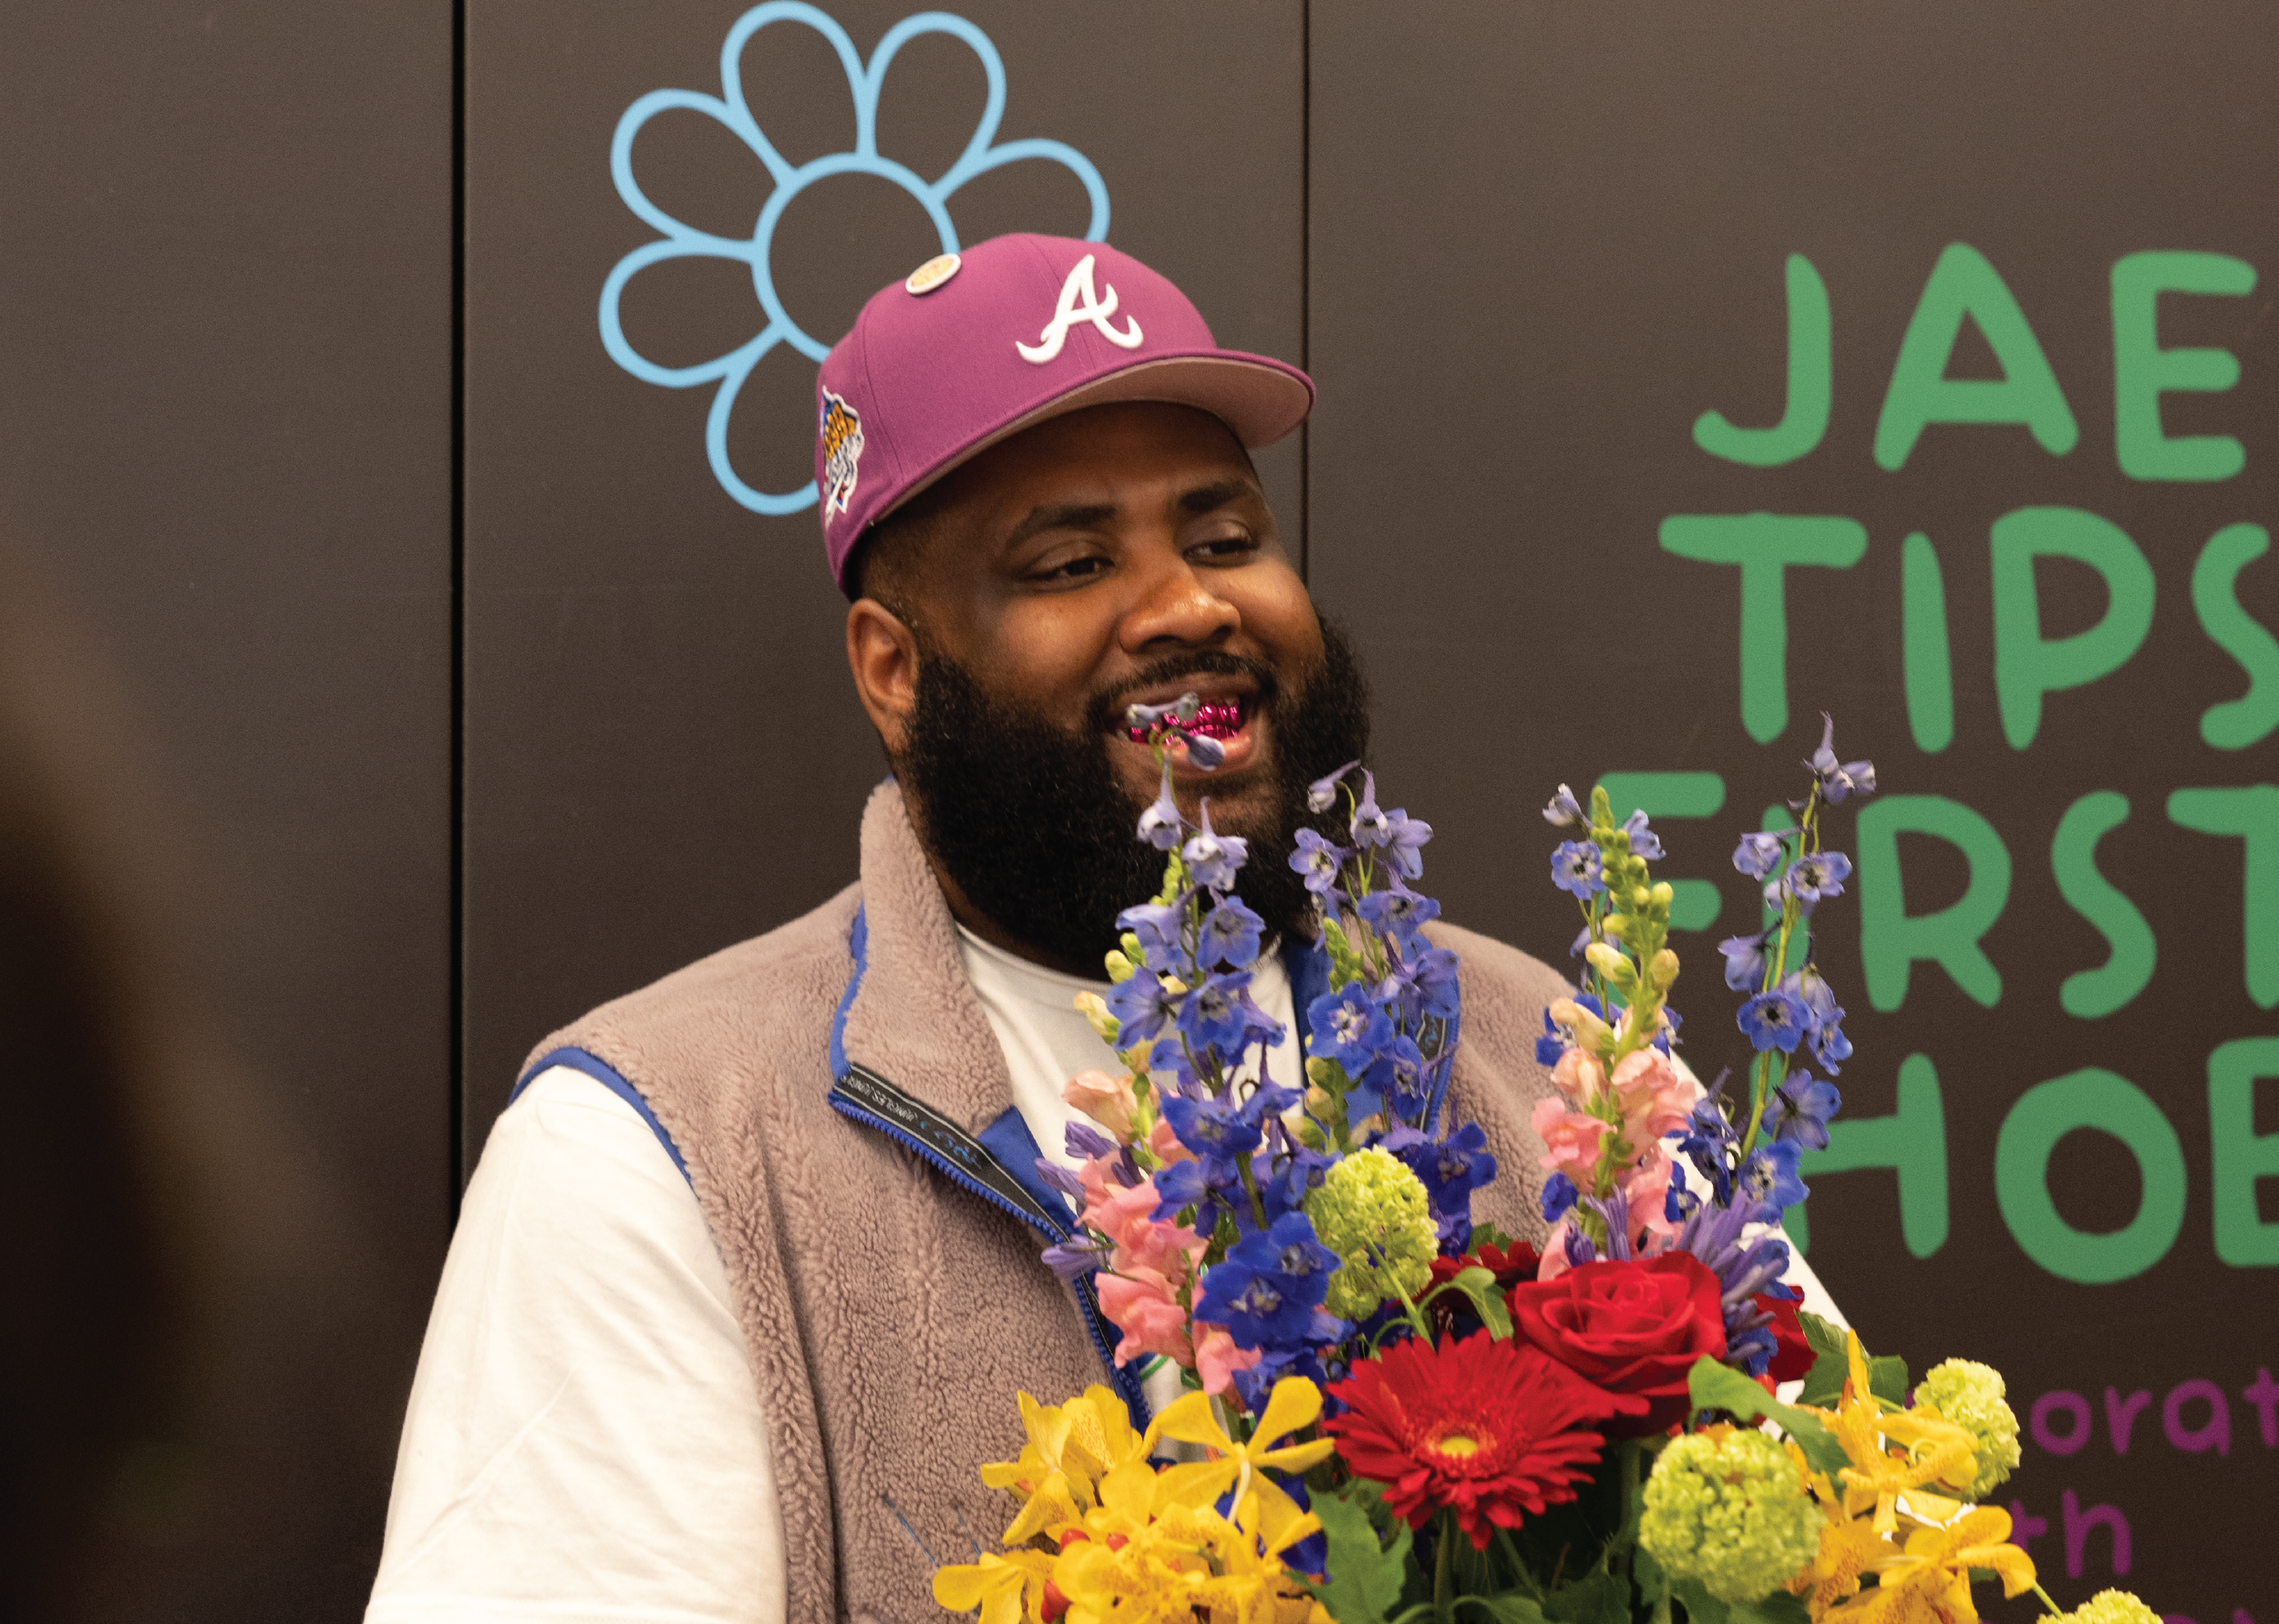 Jae Tips celebrates his first shoe collab with Saucony at Wish ATL